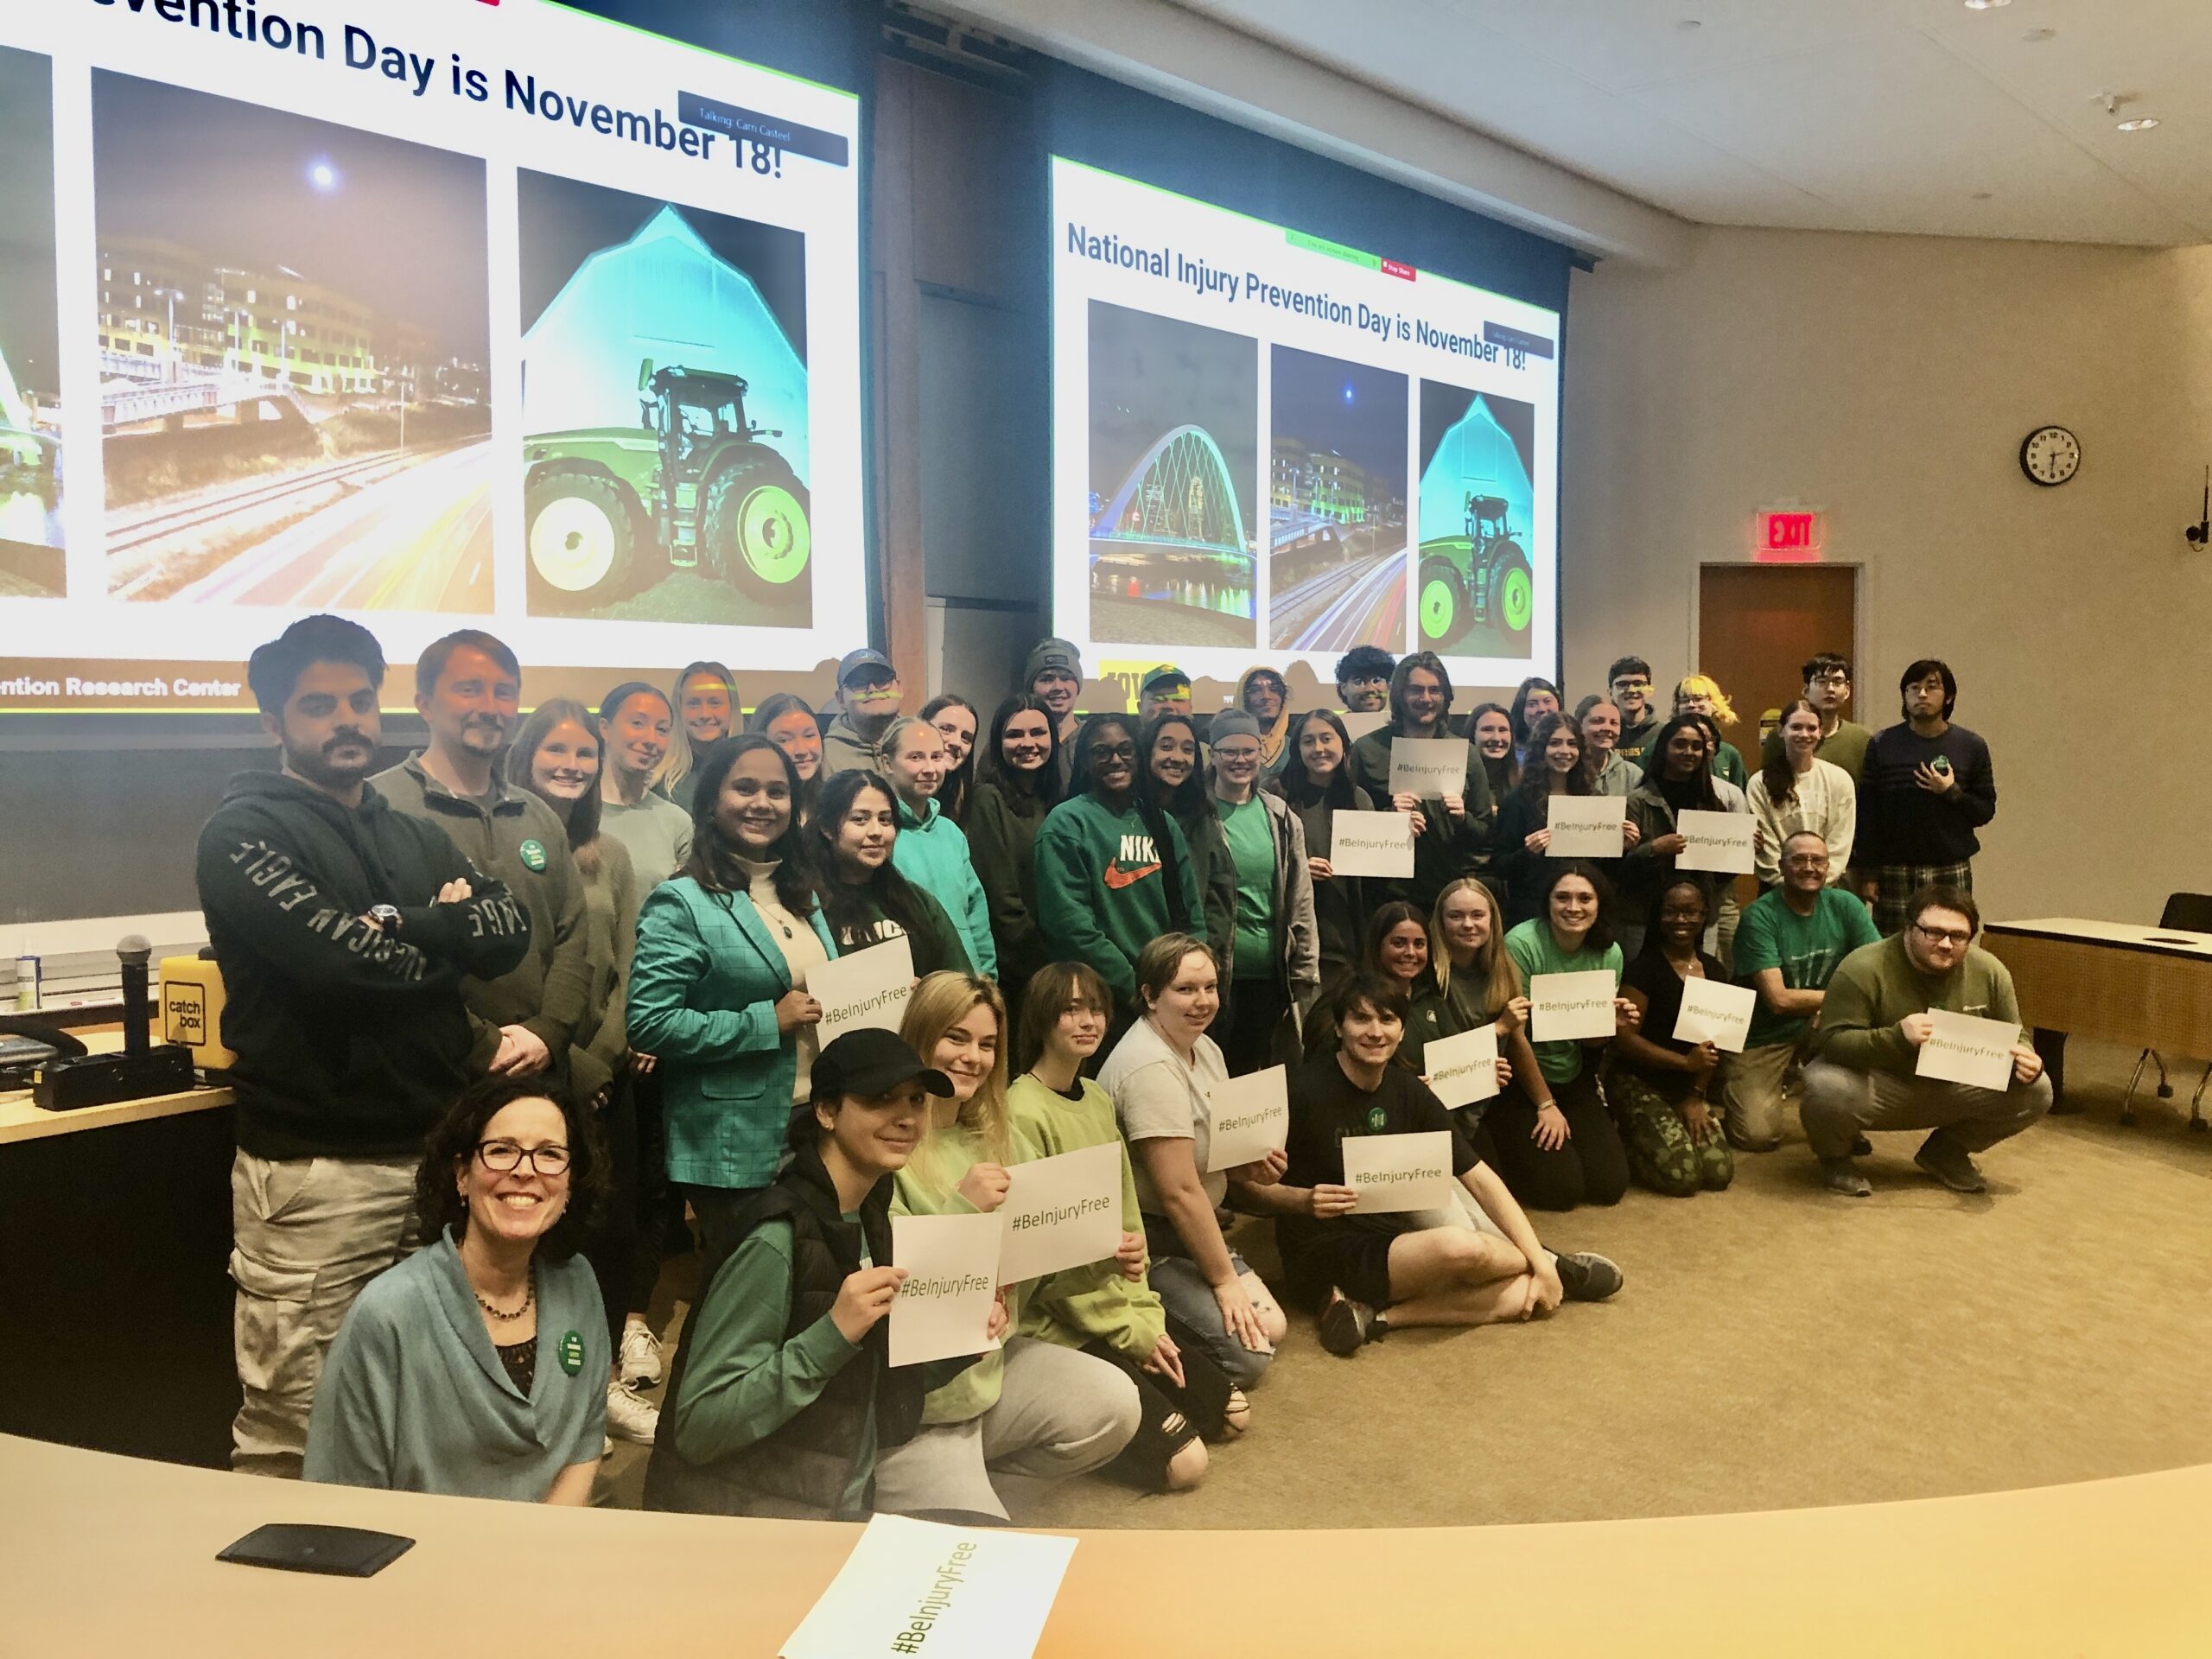 Students wear green for National Injury Prevention Day in Professor Carri Casteel's Injury and Violence Prevention course at the UI College of Public Health.